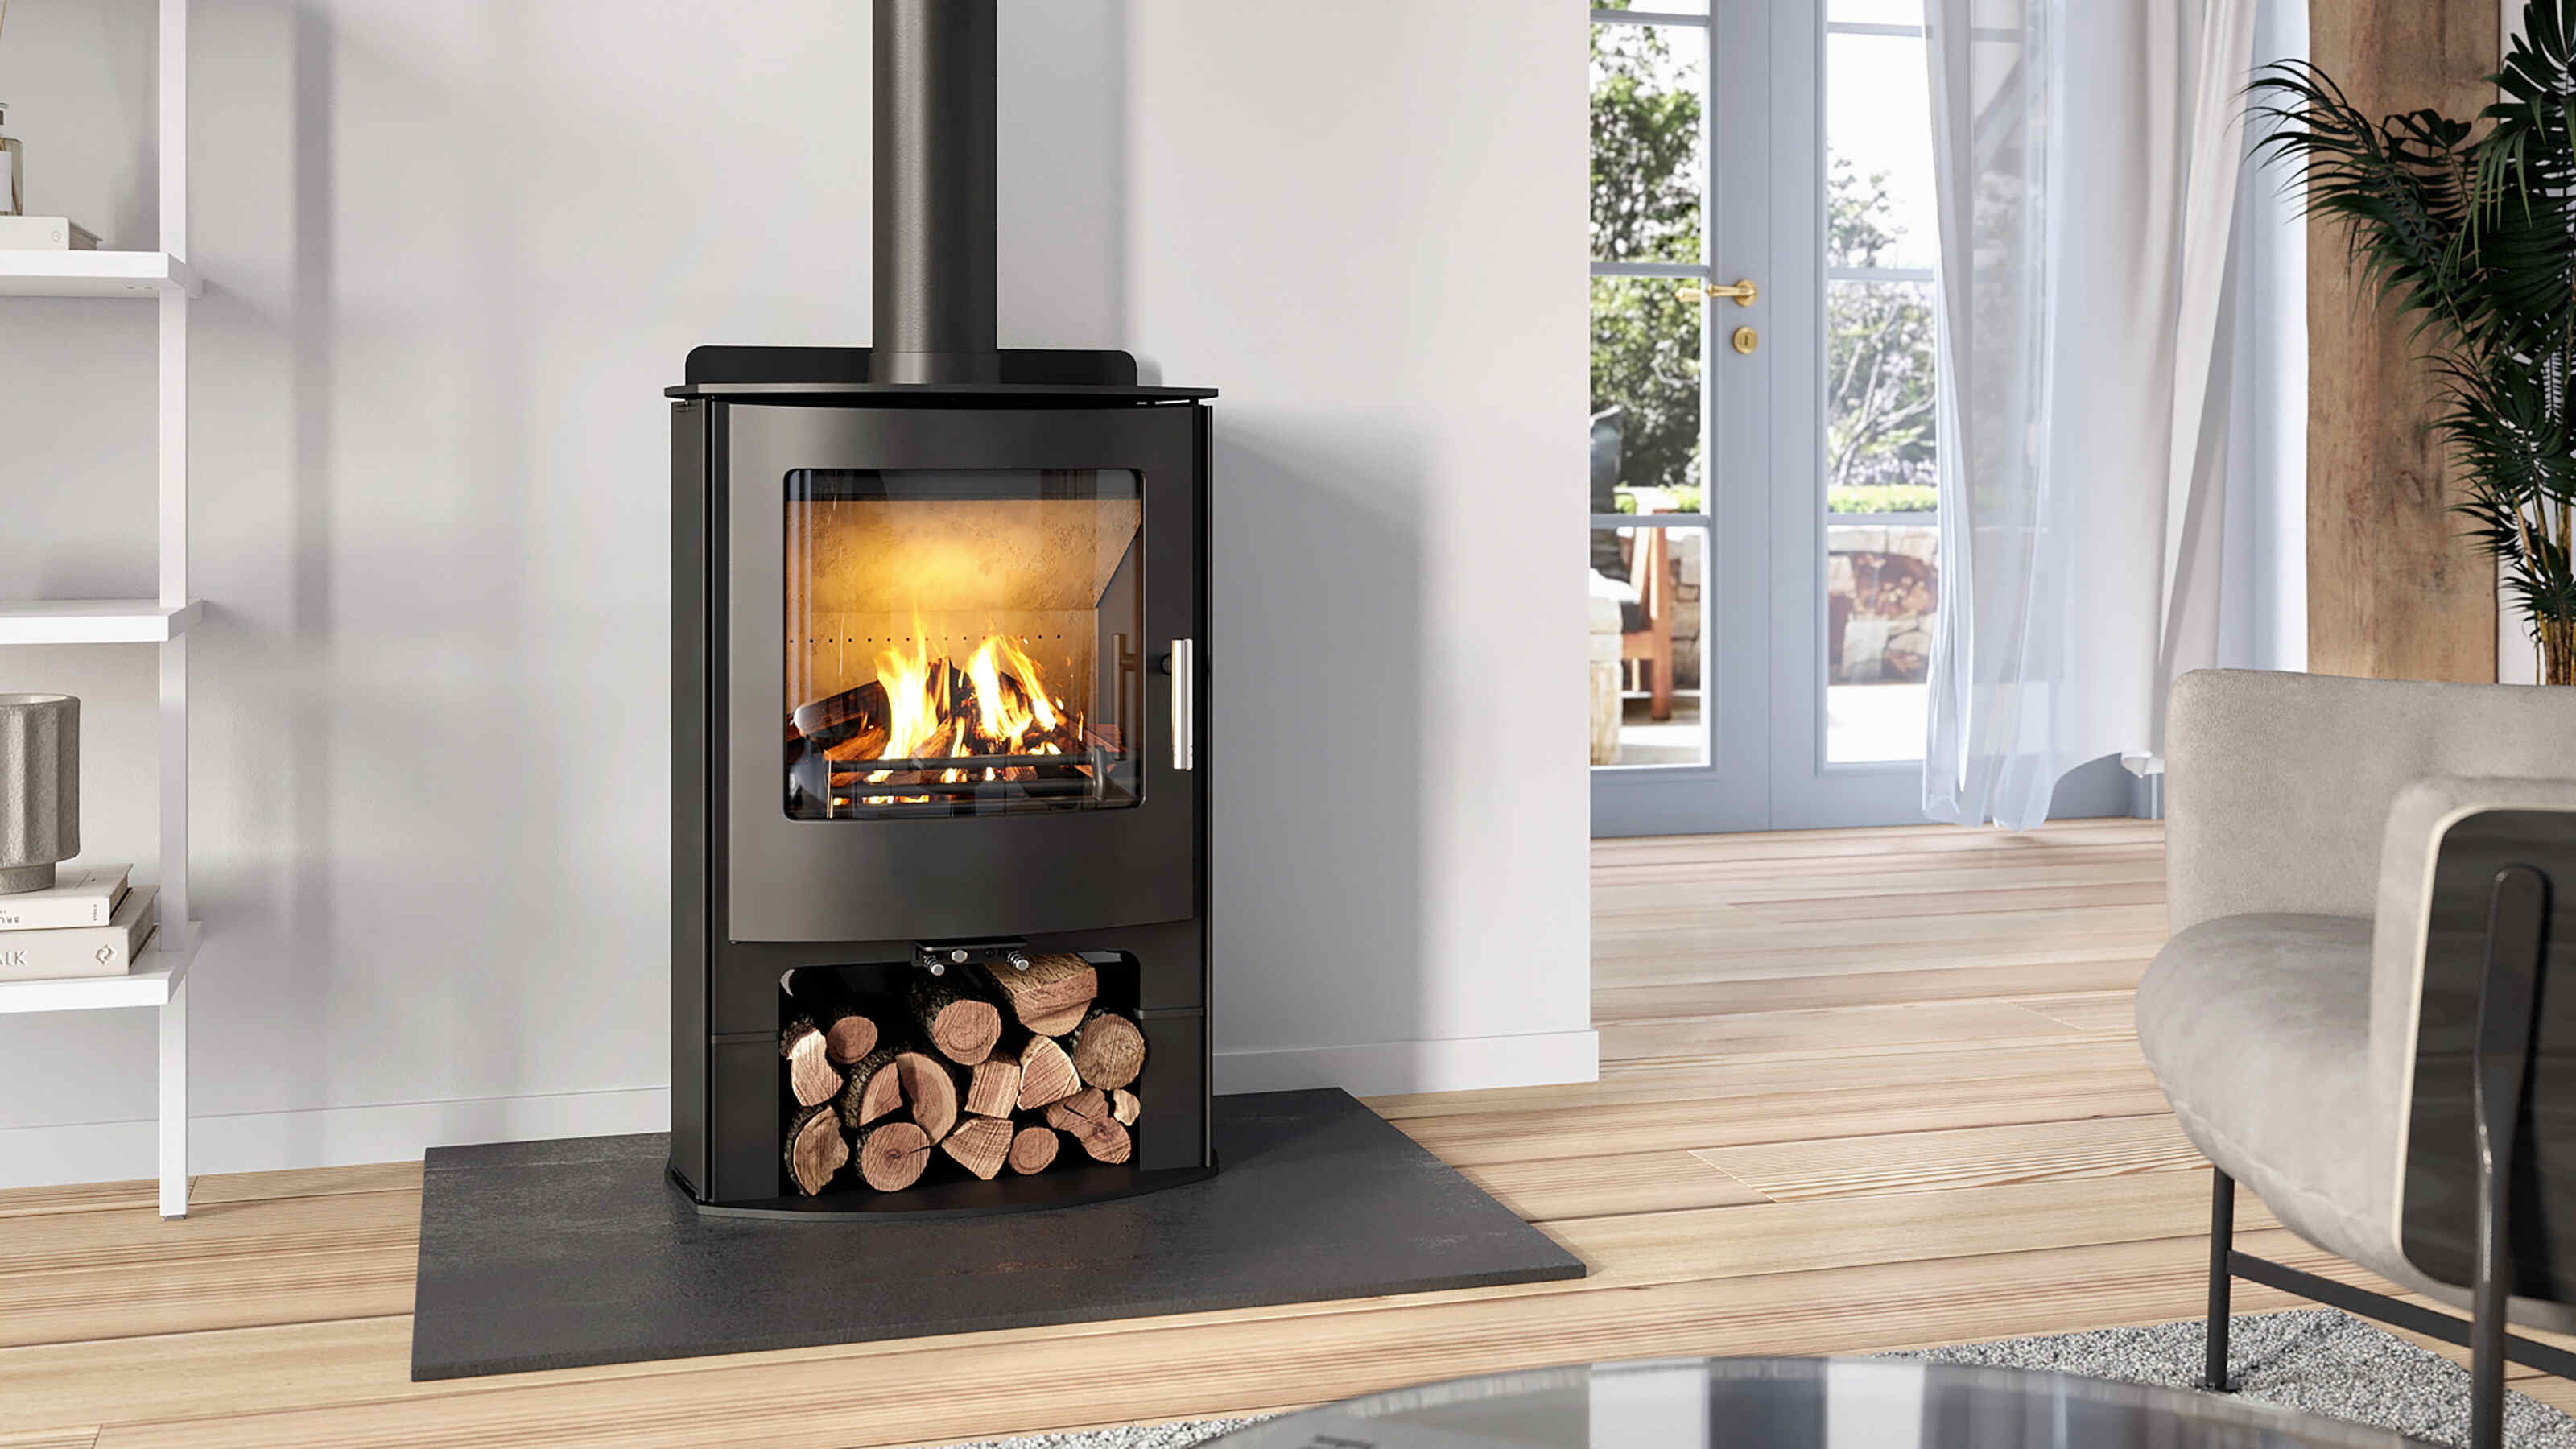 How To Have A Fireplace Without A Chimney